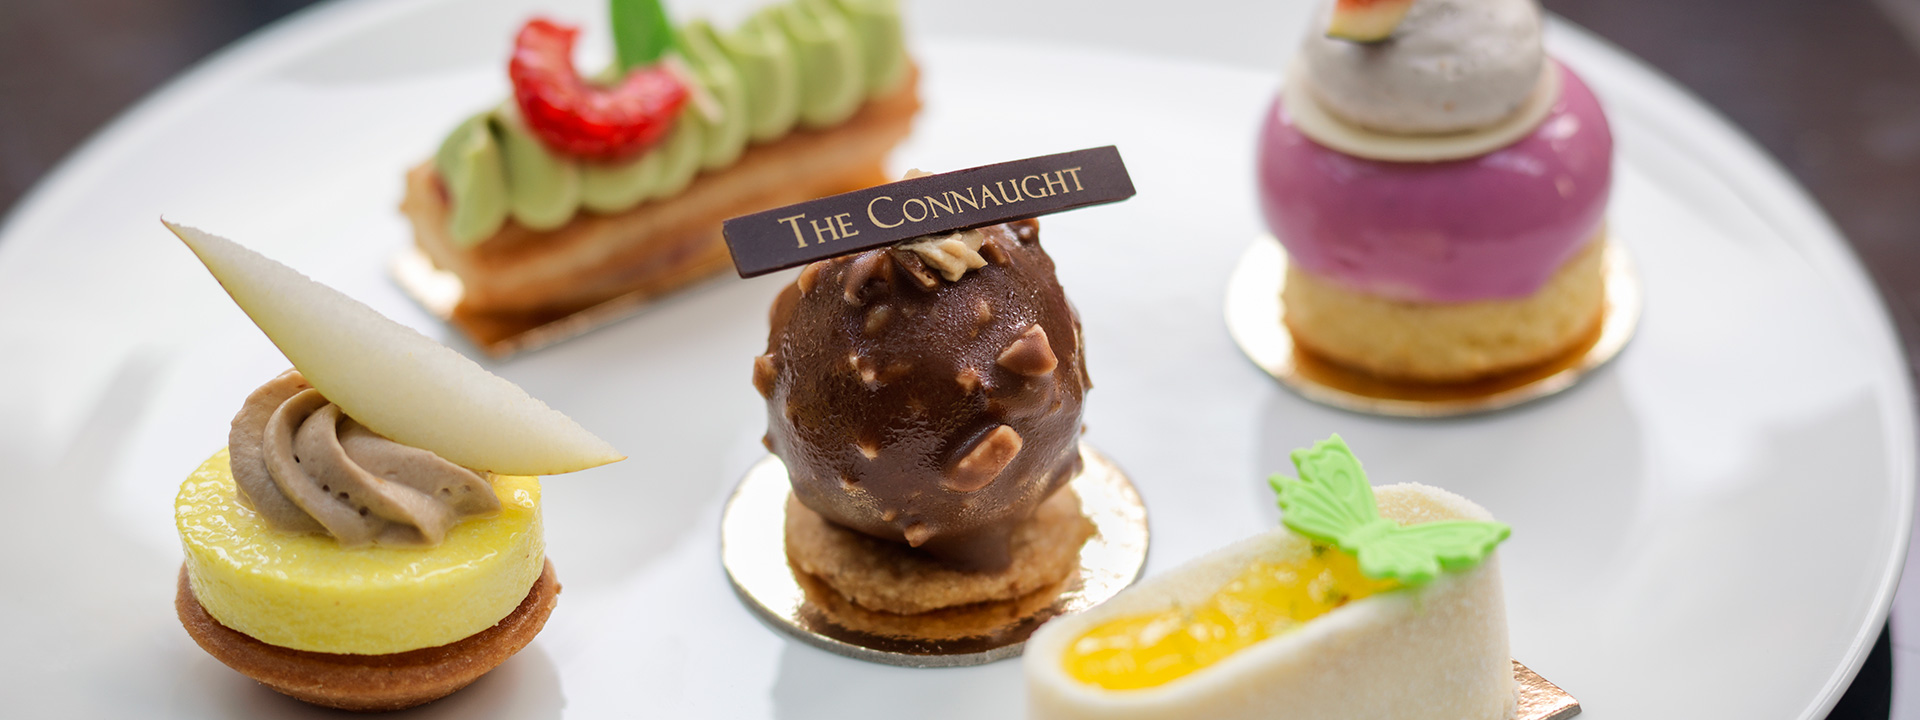 Sweet canap�s in The Connaught, presented on a white plate, creatively decorated and assembled.